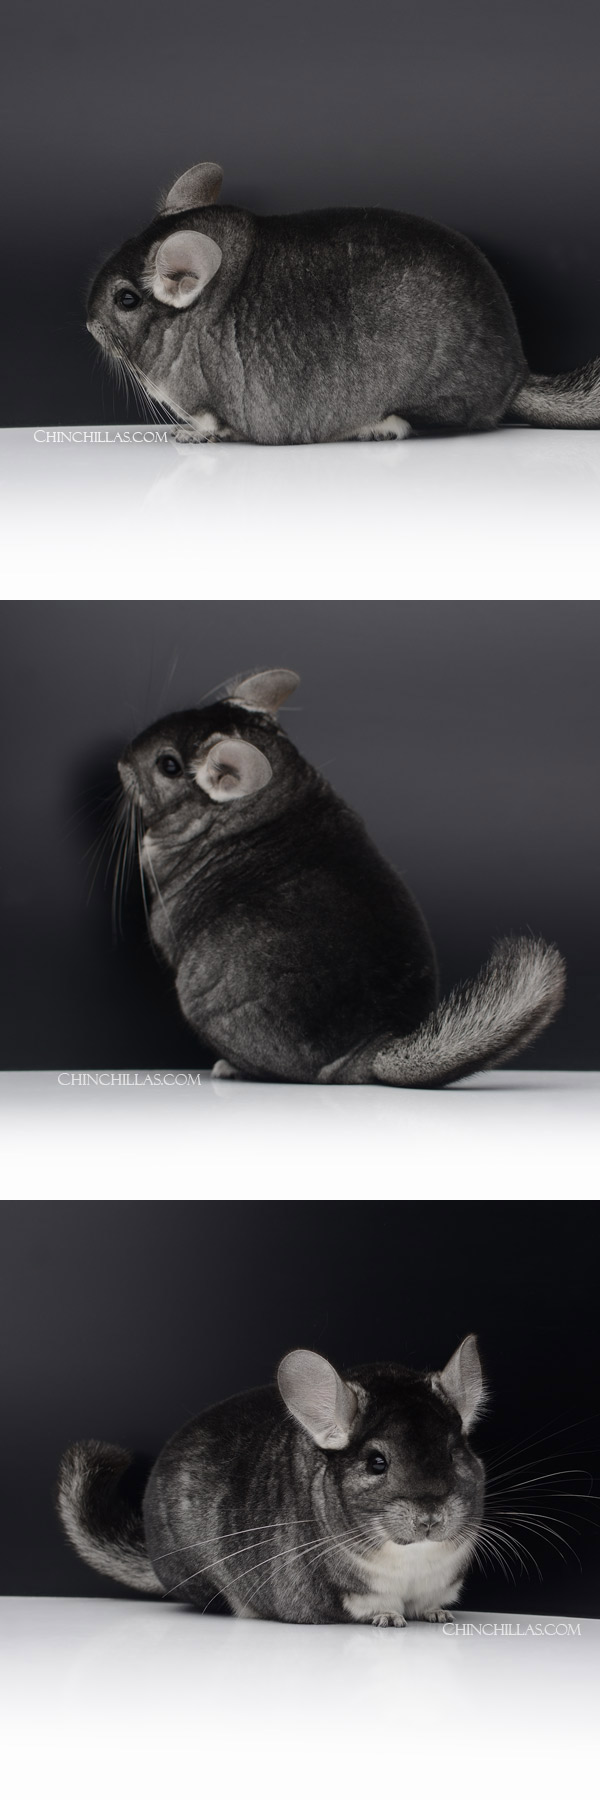 Chinchilla or related item offered for sale or export on Chinchillas.com - 23027 National 1st Place Standard Female Chinchilla